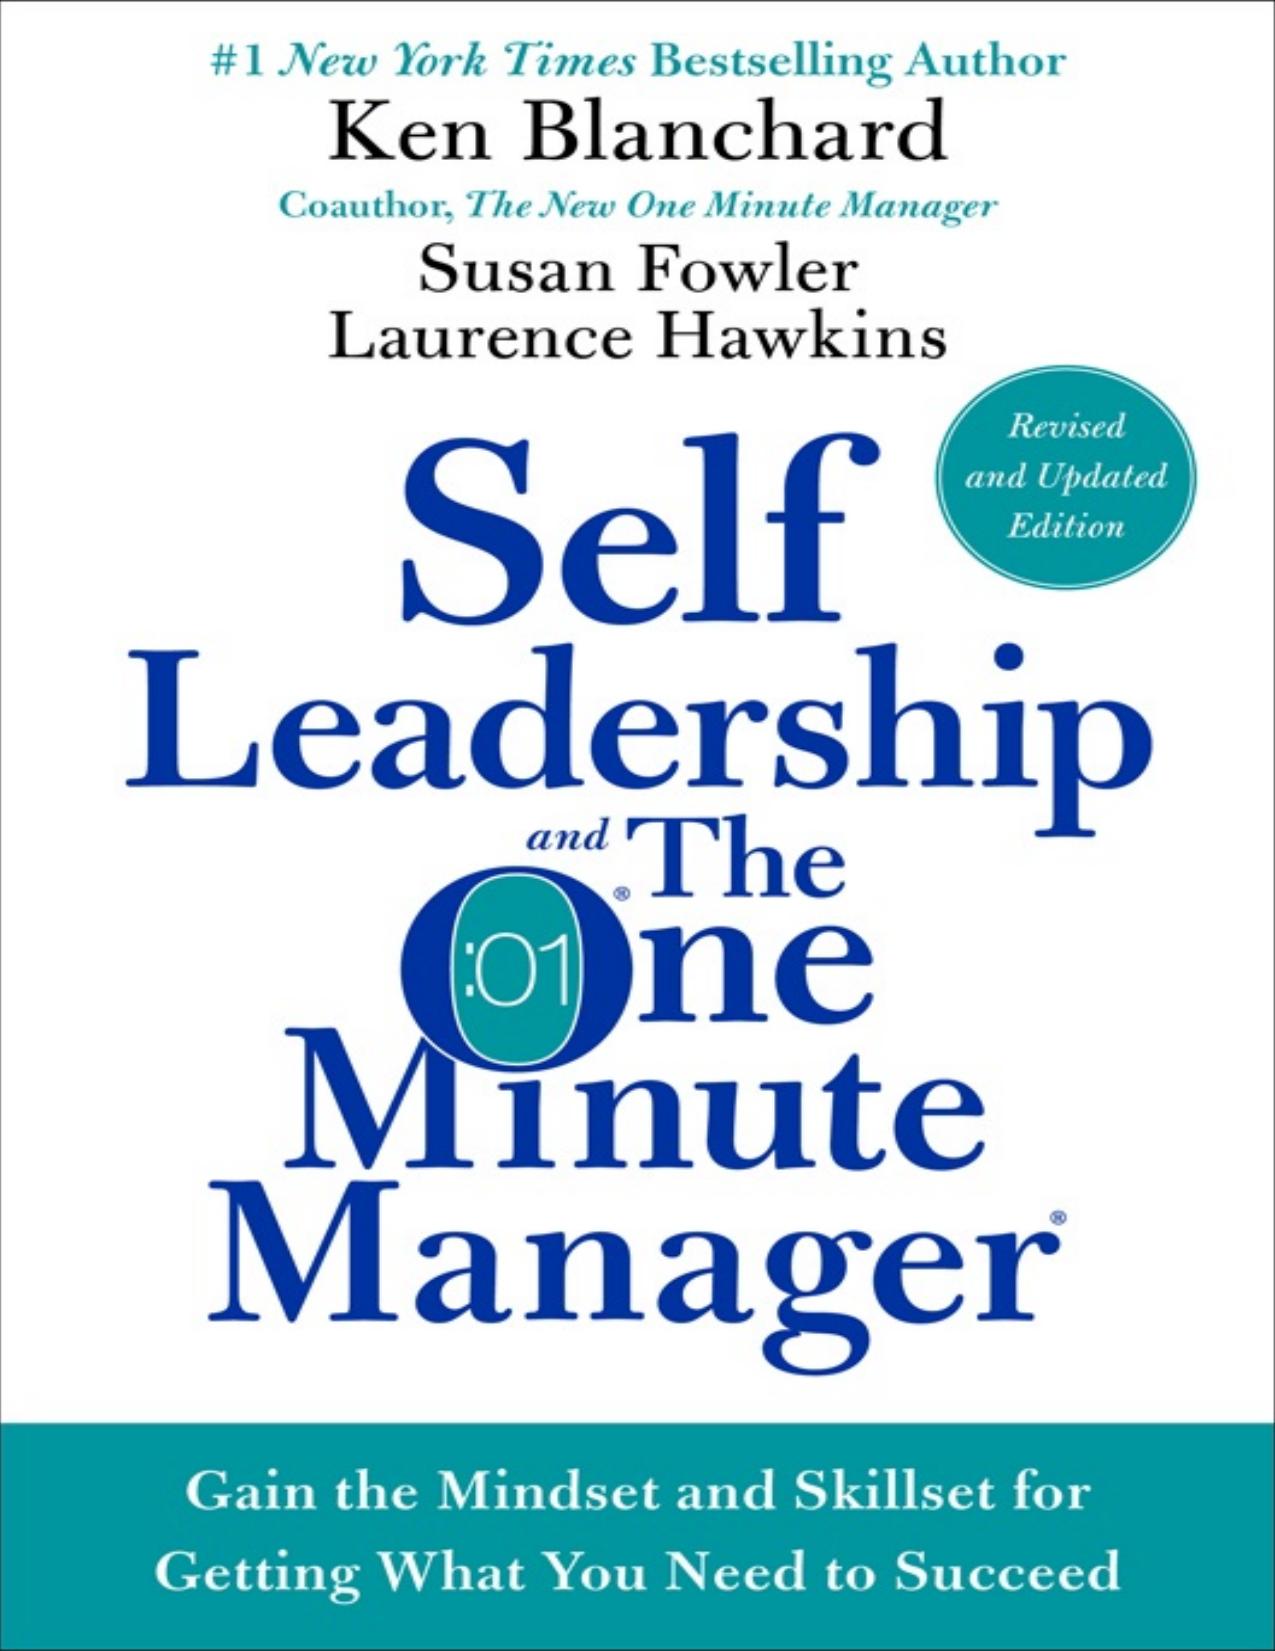 Self Leadership and the One Minute Manager - PDFDrive.com